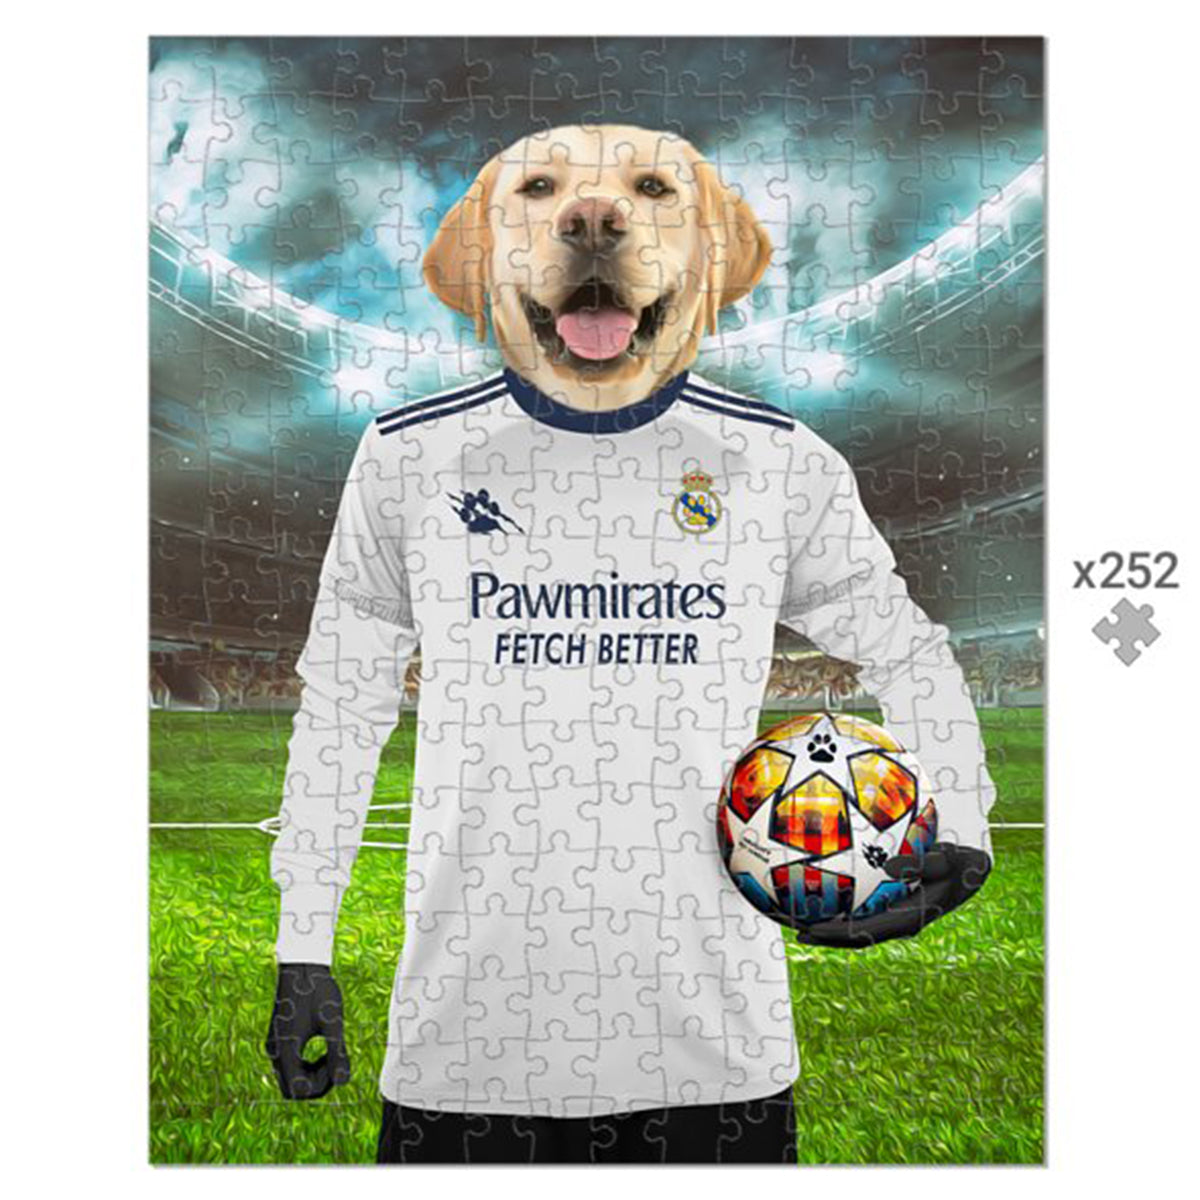 Real Pawdrid Football Club Paw & Glory, paw and glory, best dog artists, aristocrat dog painting, dog drawing from photo, pet portraits leeds, dog portrait background colors, drawing dog portraits, pet portrait